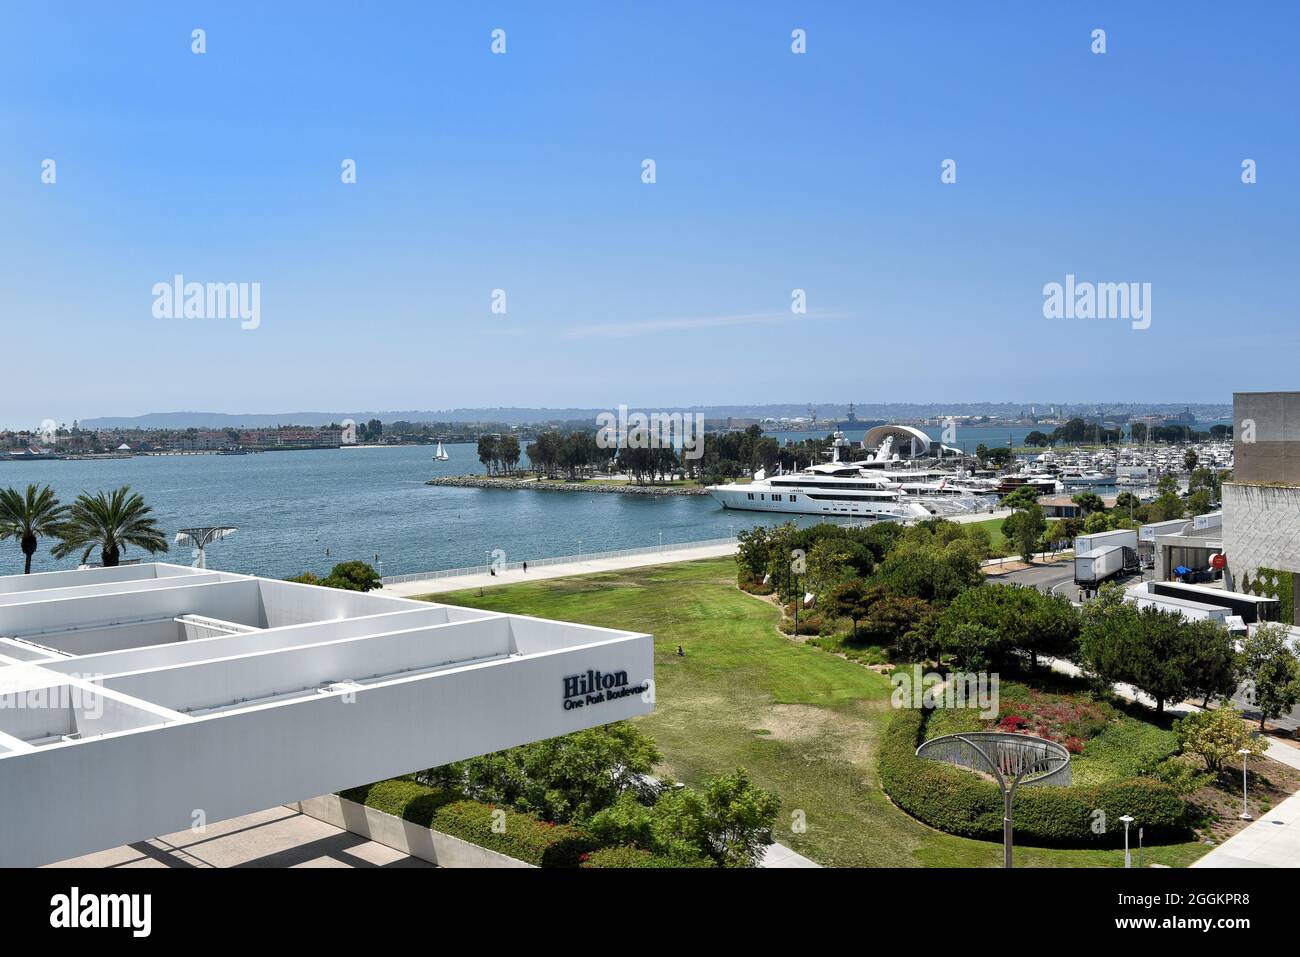 SAN DIEGO, CALIFORNIA - 25 AUG 2021: View of the bay and Embarcadero Marina from the Hilton Bayfront Hotel. Stock Photo